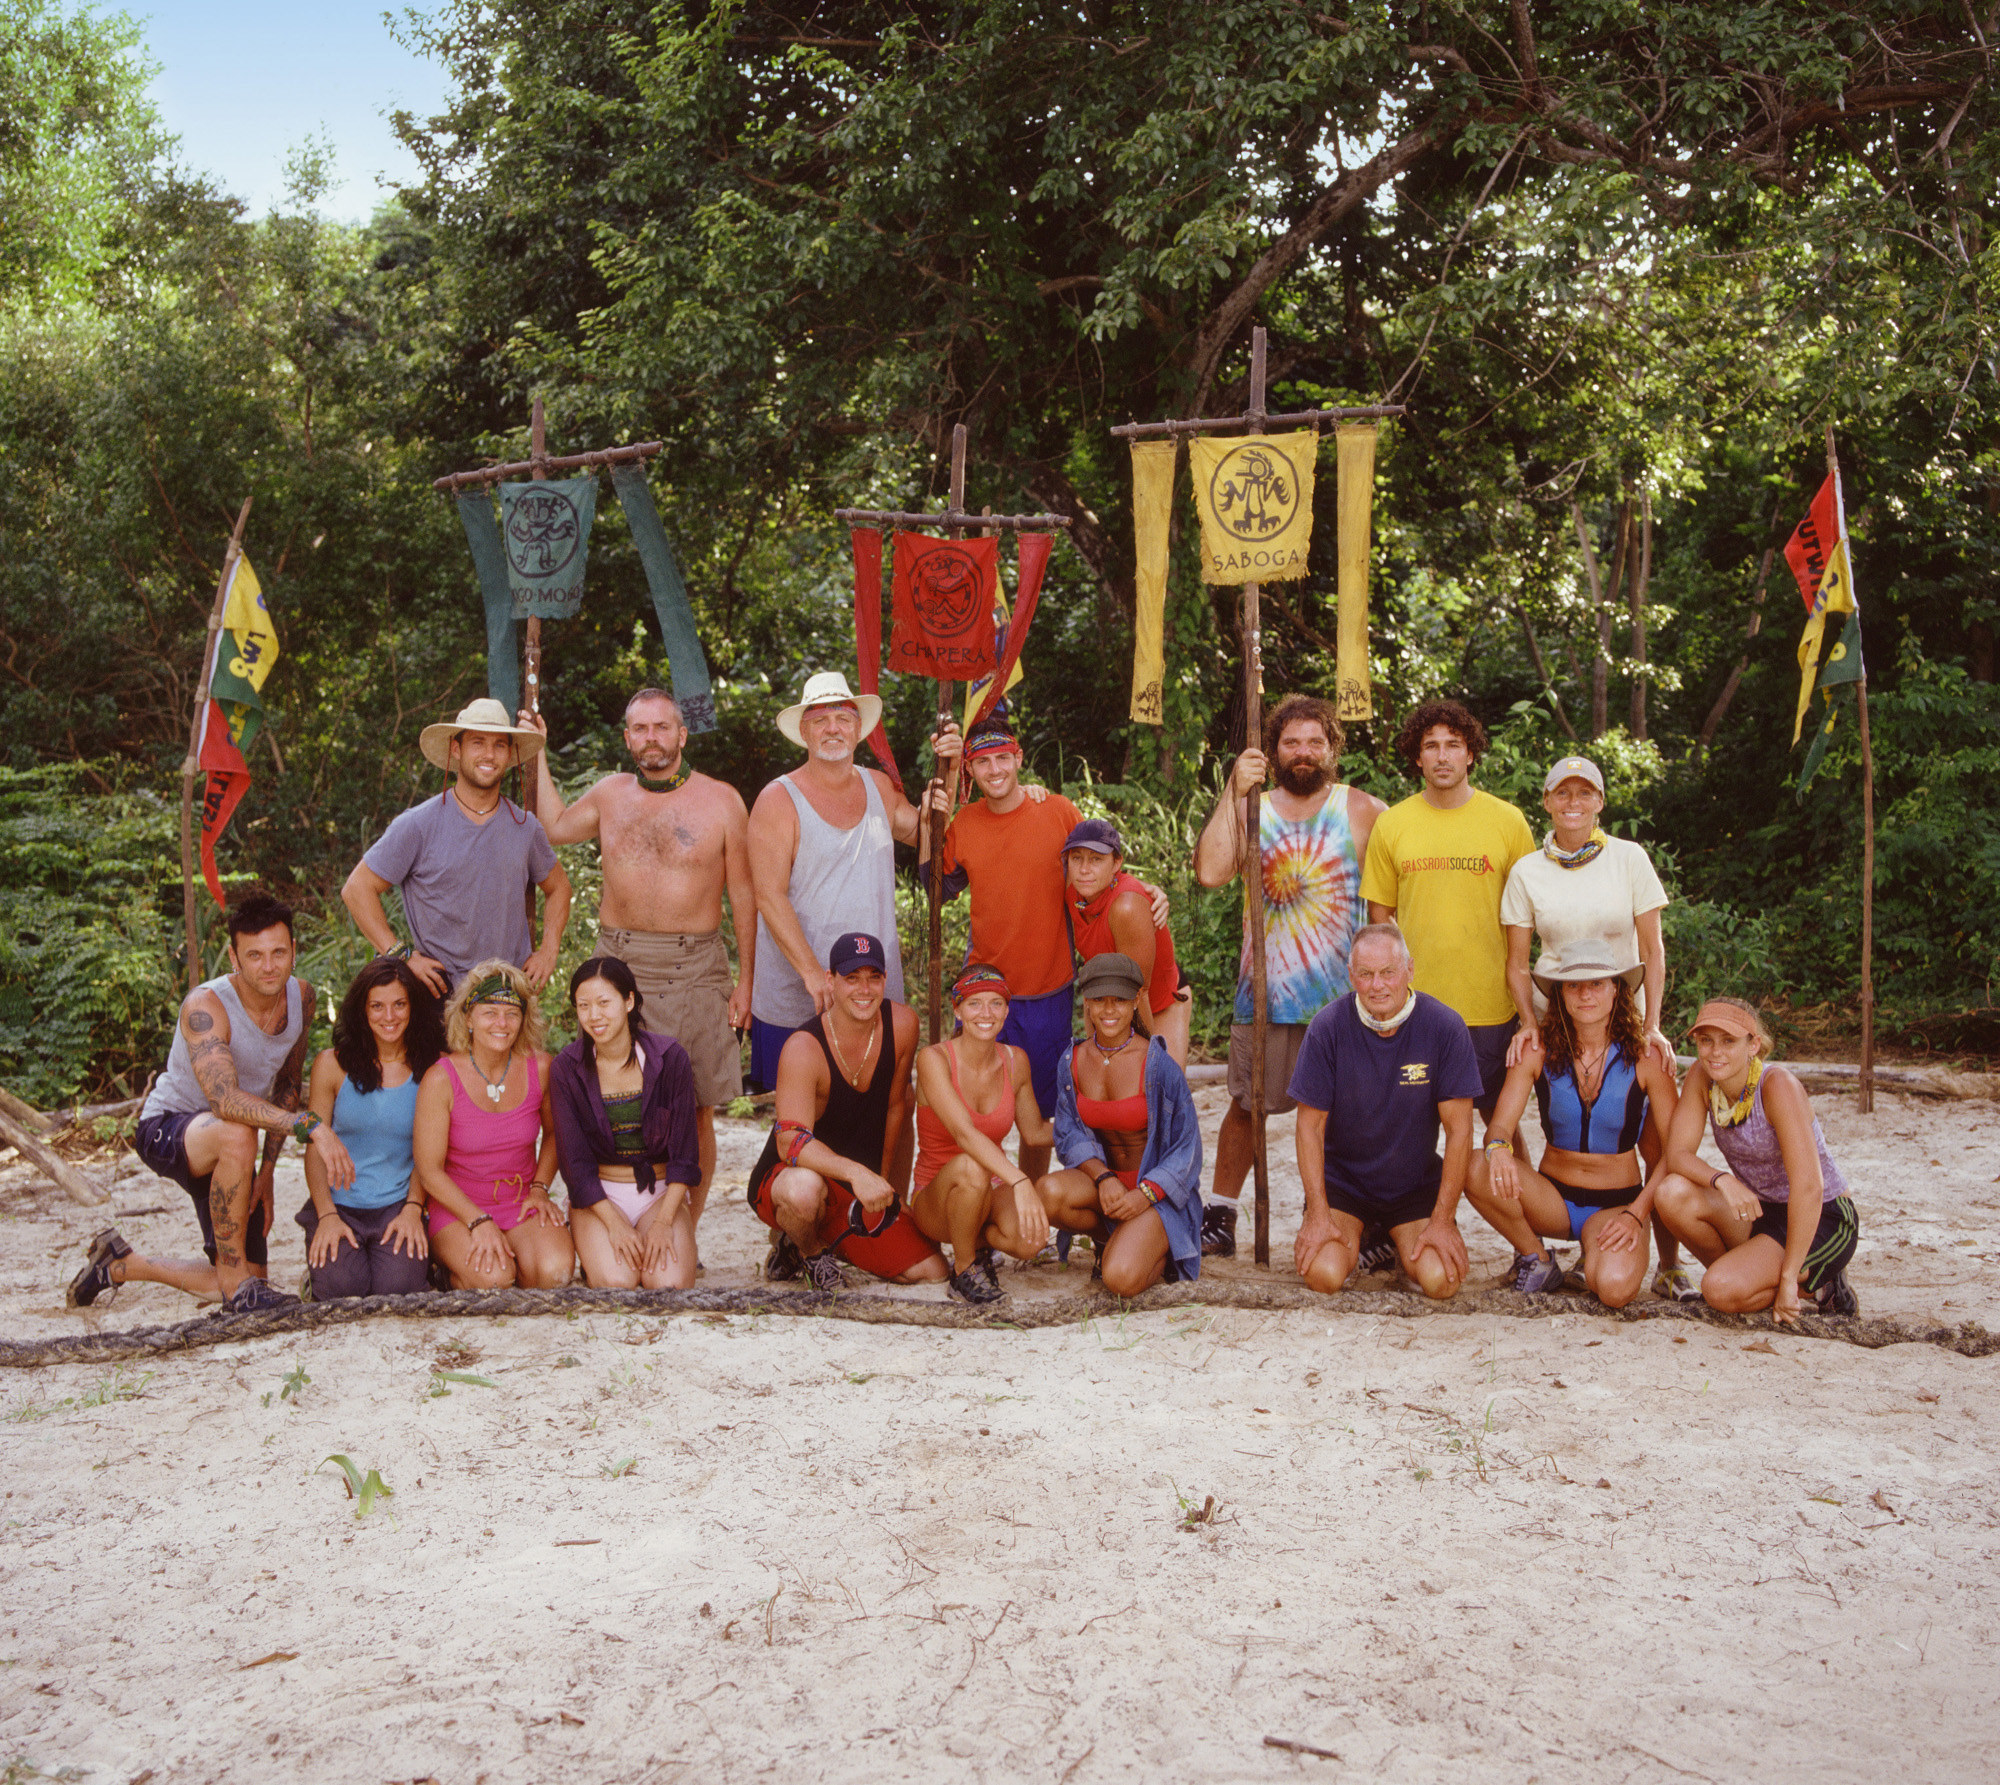 When does Survivor 45 start? Release date, Filming dates, rumored cast,  returning players, and more